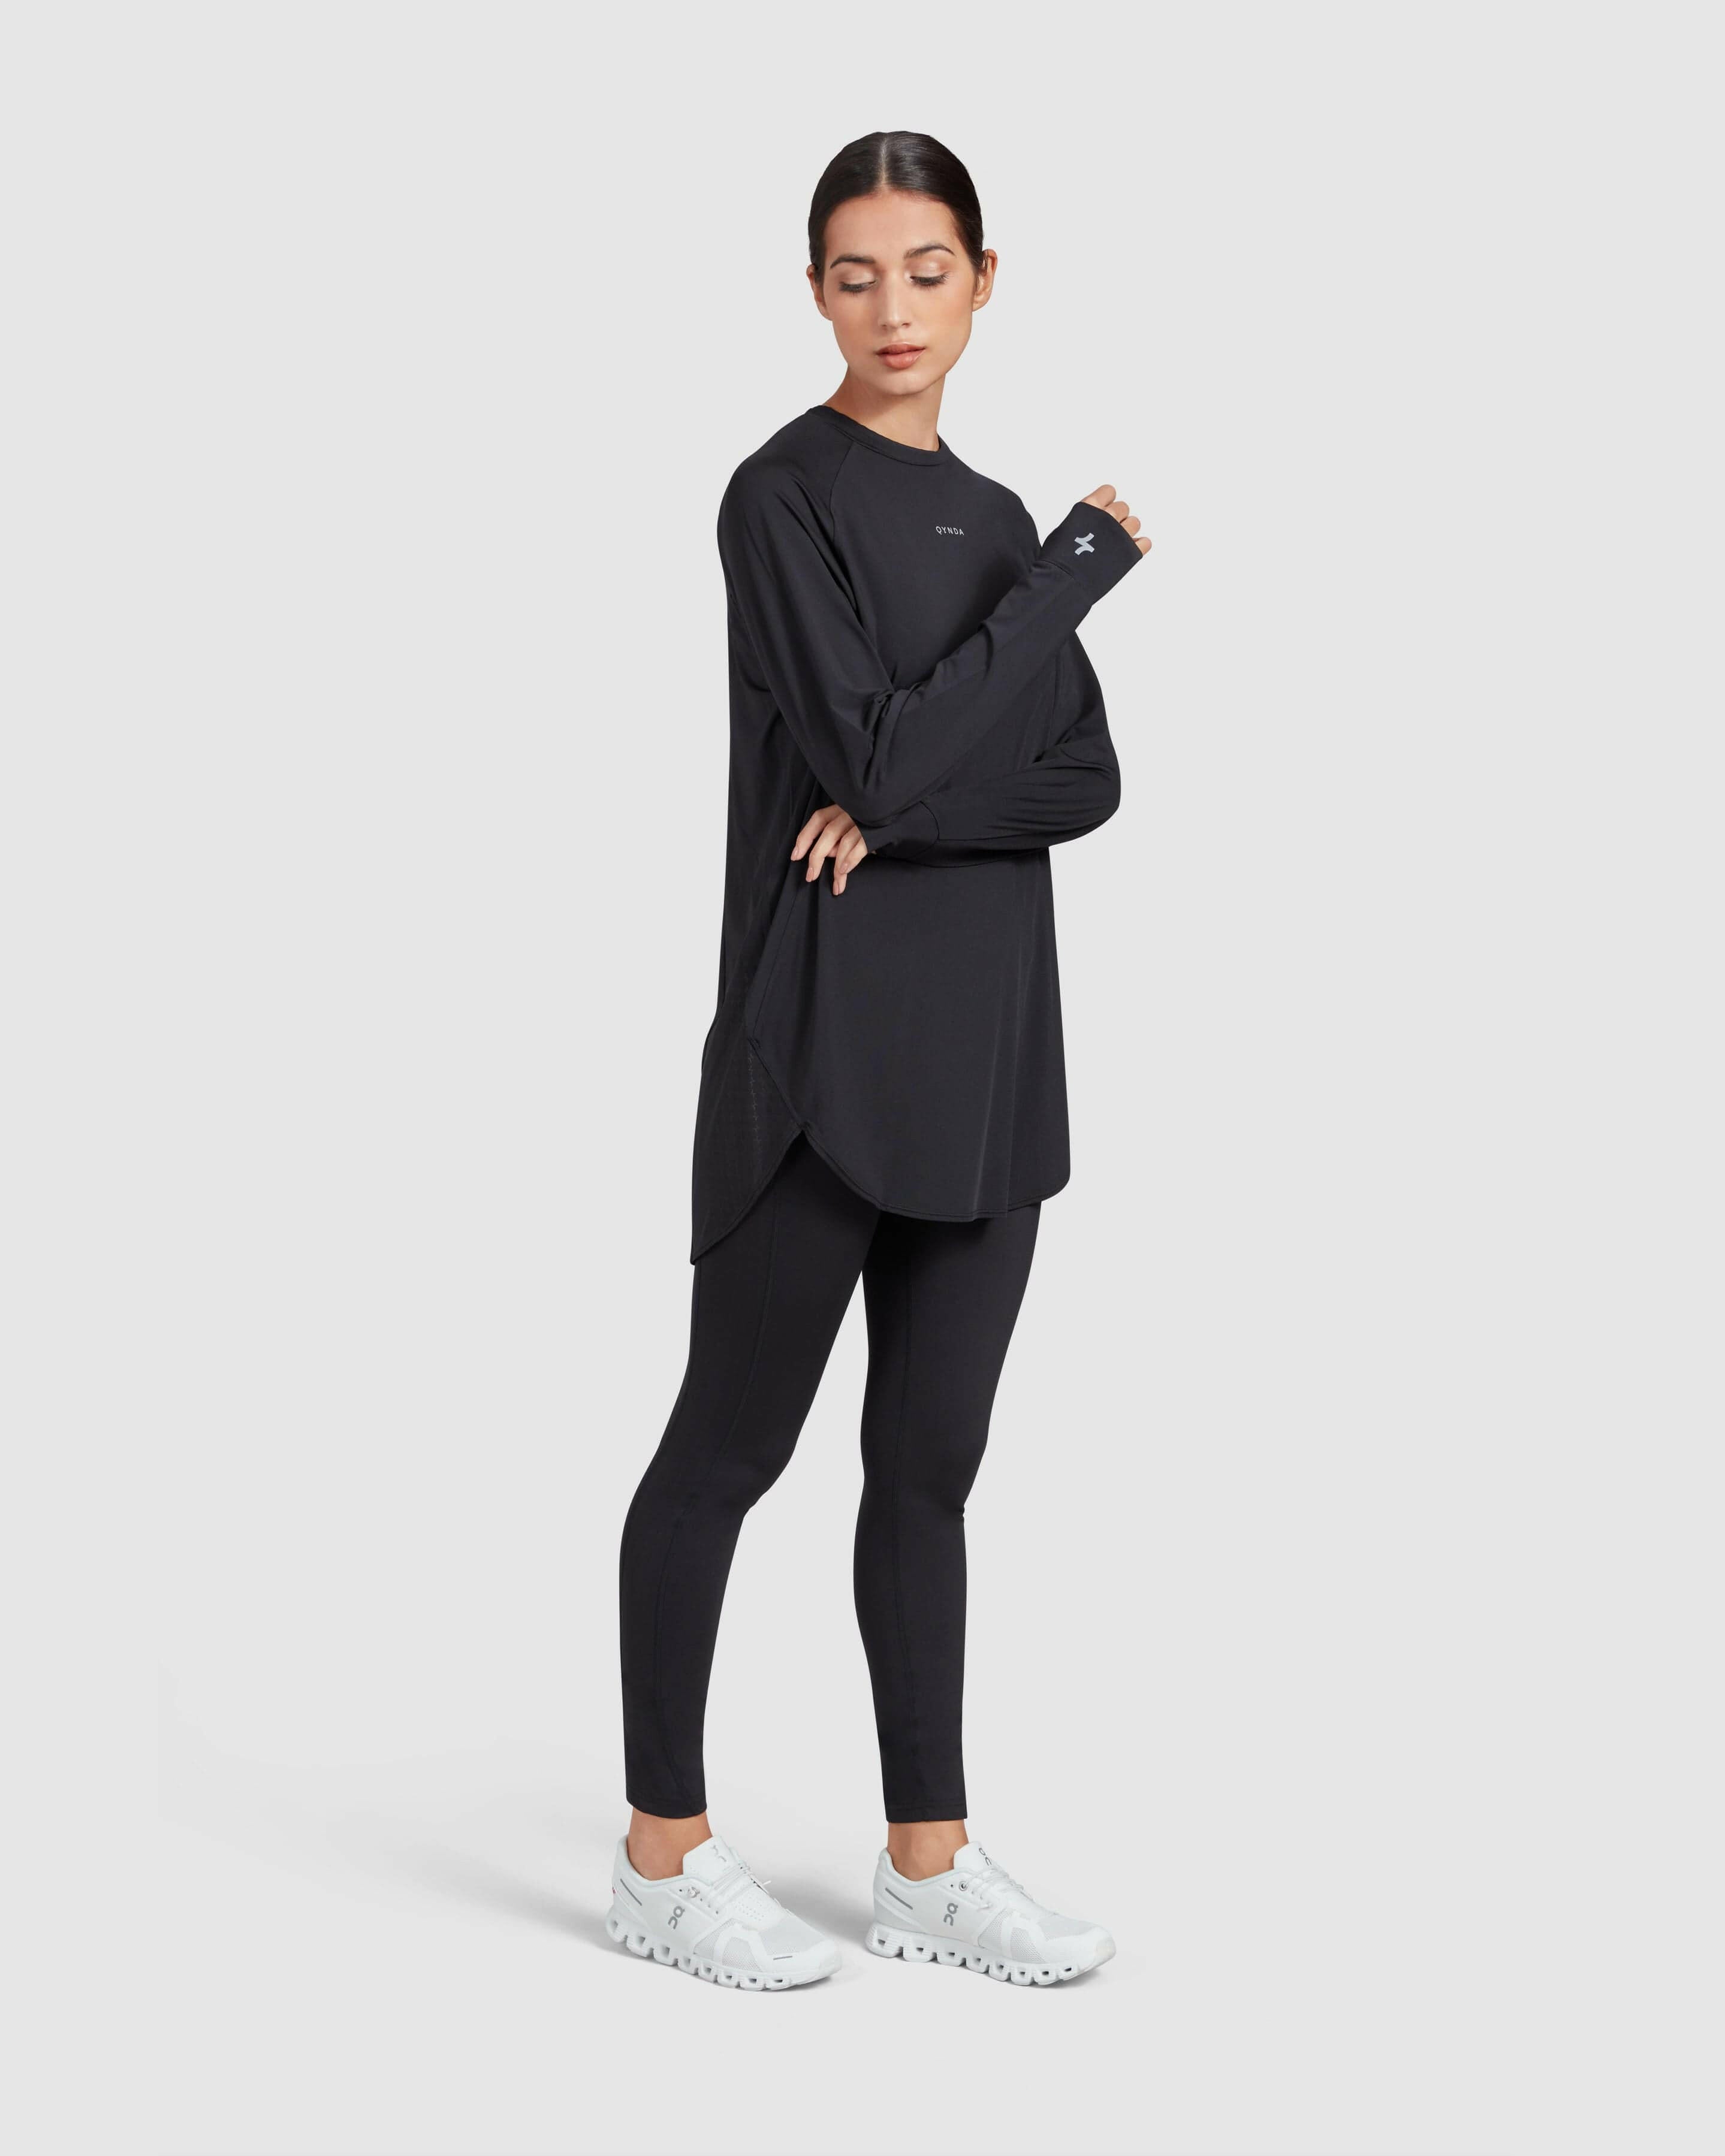 A model stands confidently in a modest Black MOD LONG SLEEVE T-SHIRT by Qynda made of super light material, black leggings, and white sneakers, arms crossed, looking to her left on a plain background.